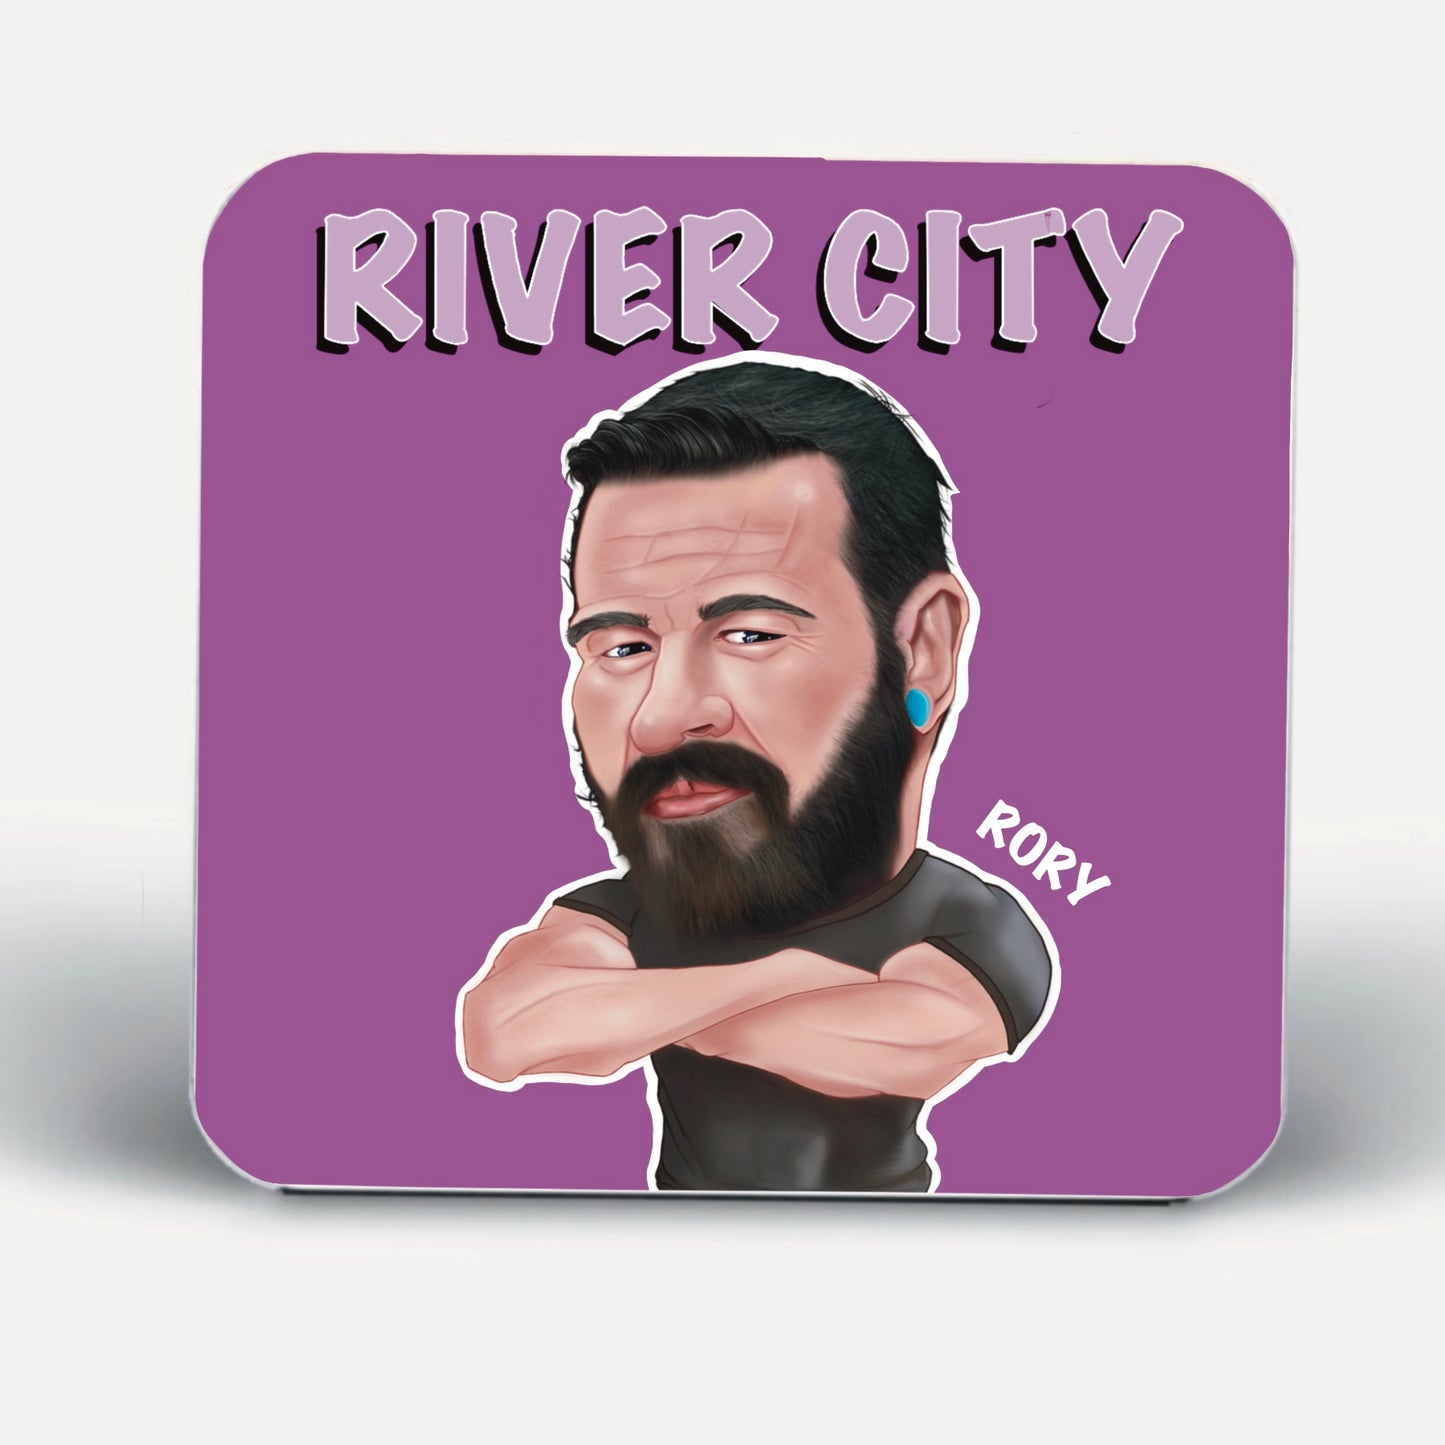 Set 10 Coasters-Coasters River City special offer